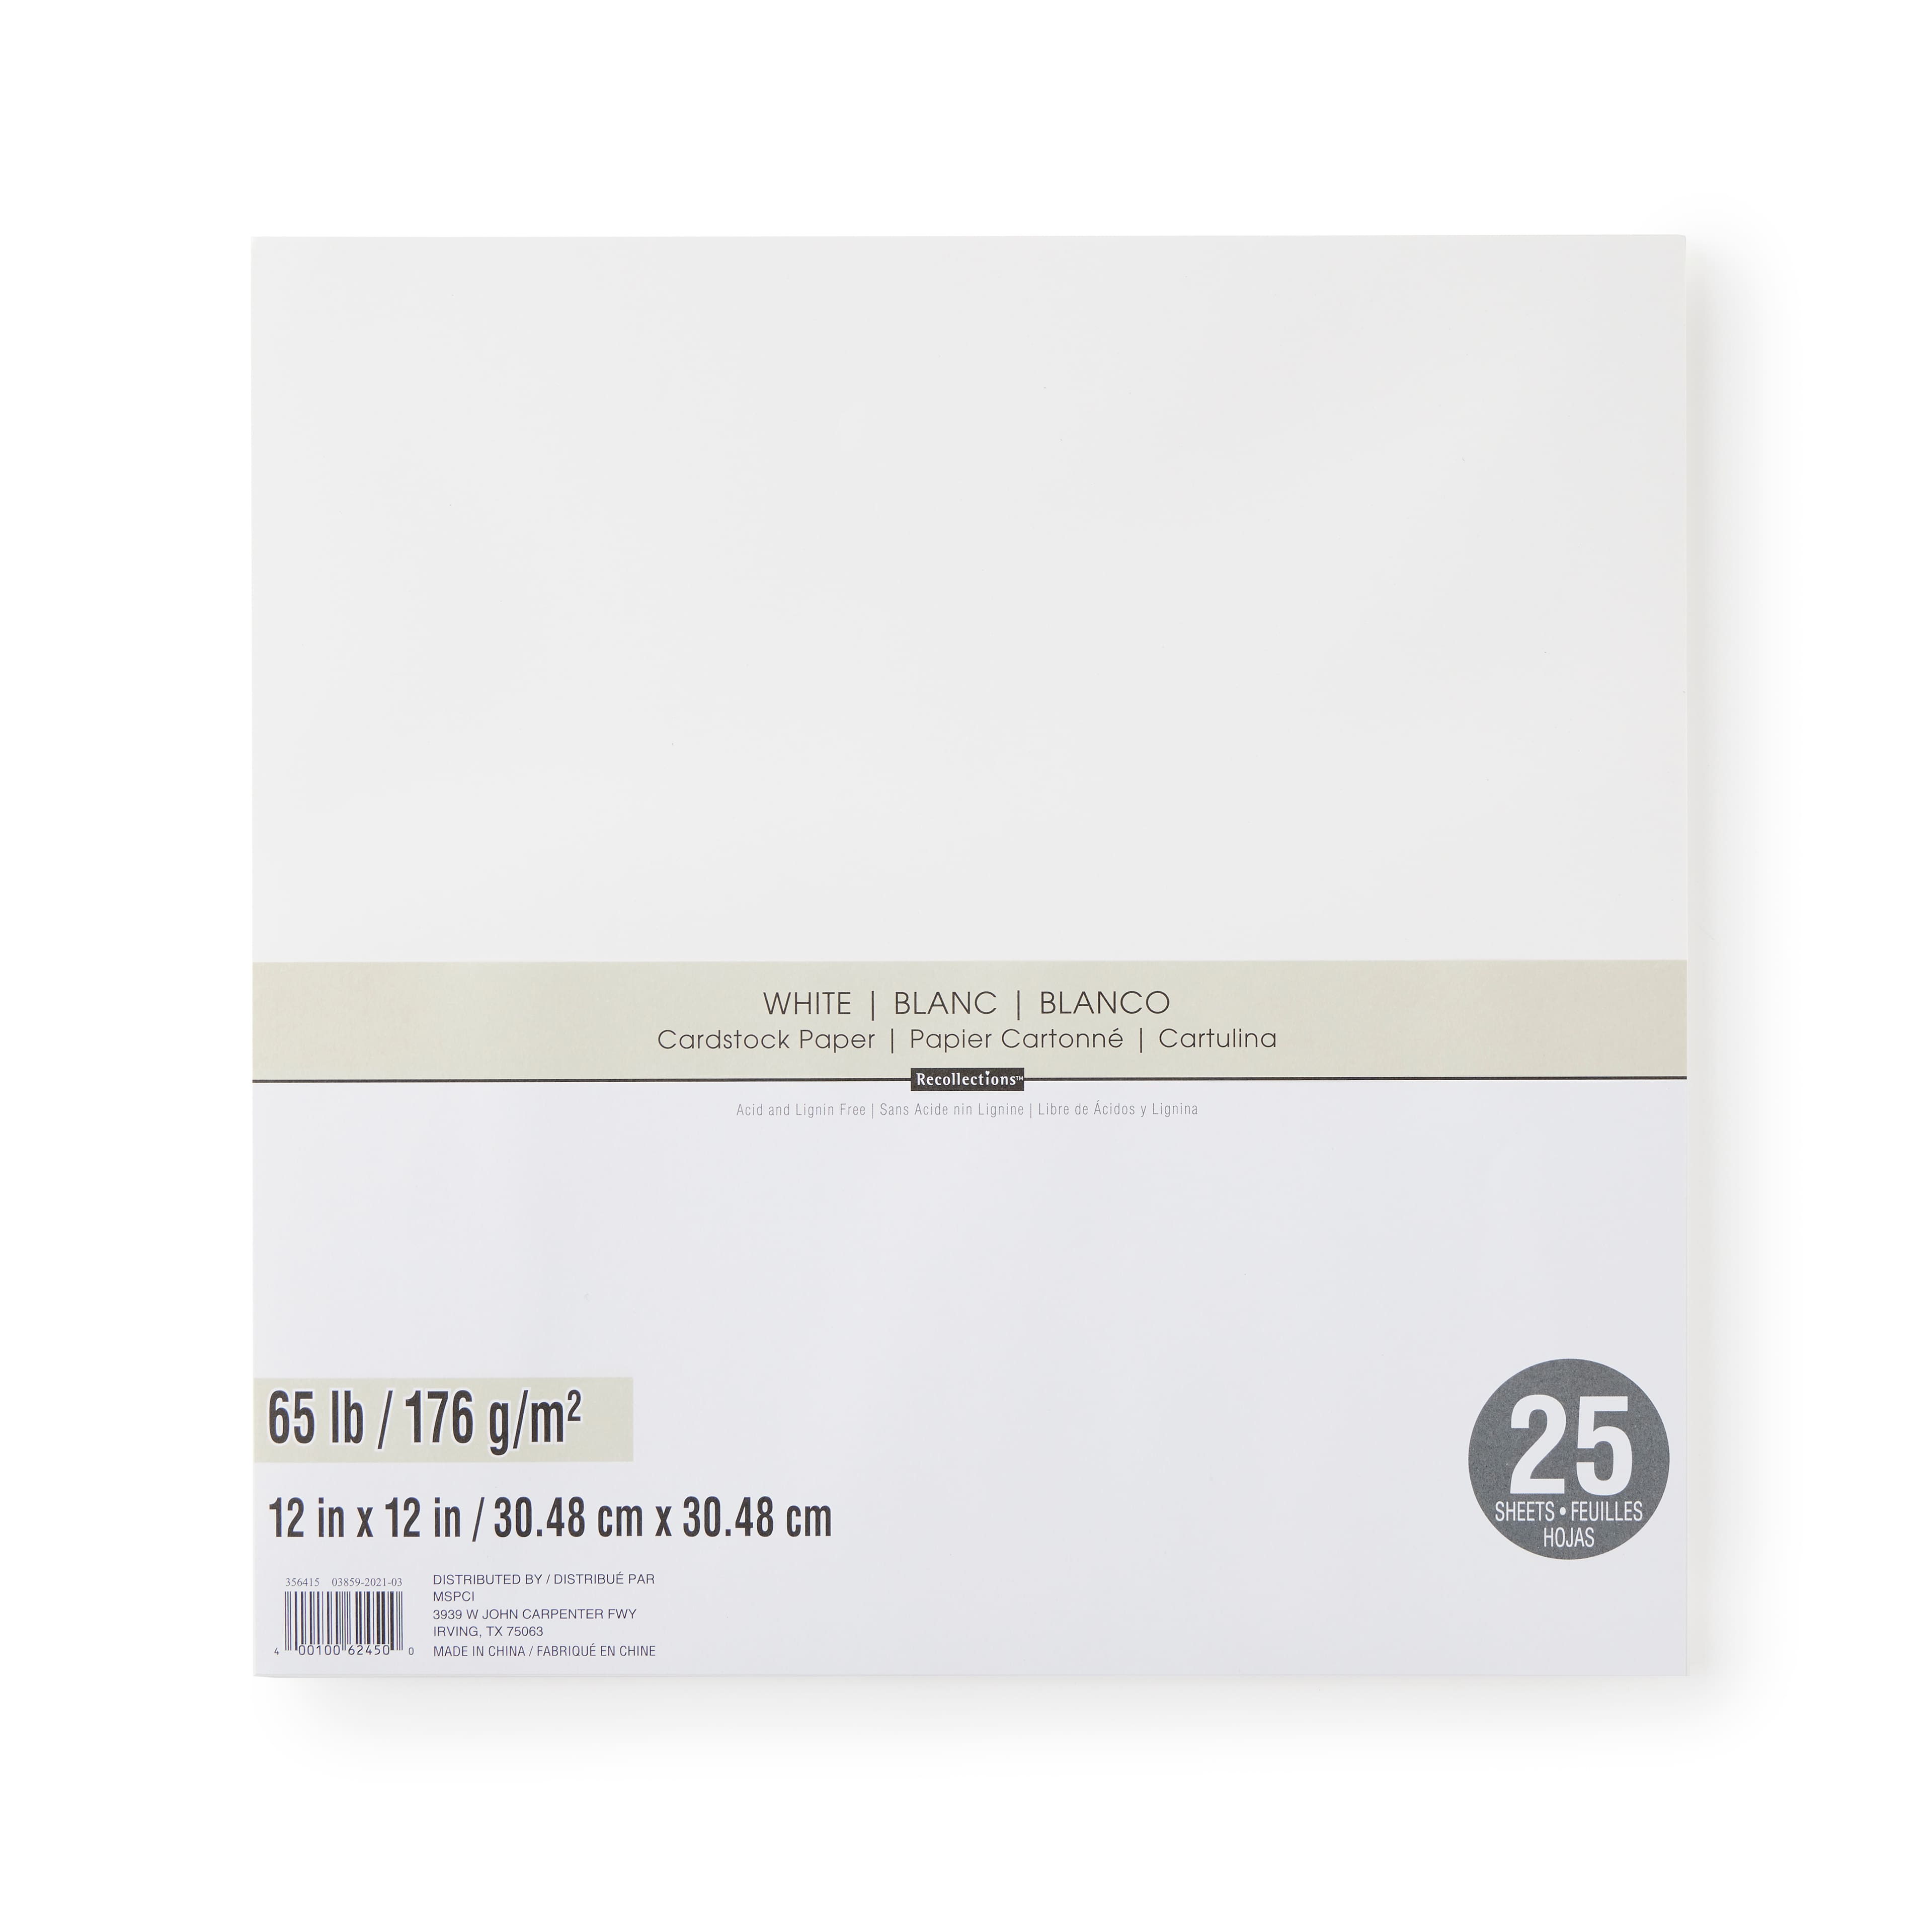  300 Bright White Linen 80# Cover Paper Sheets - 5 X 7 (5X7  Inches) Photo, Card